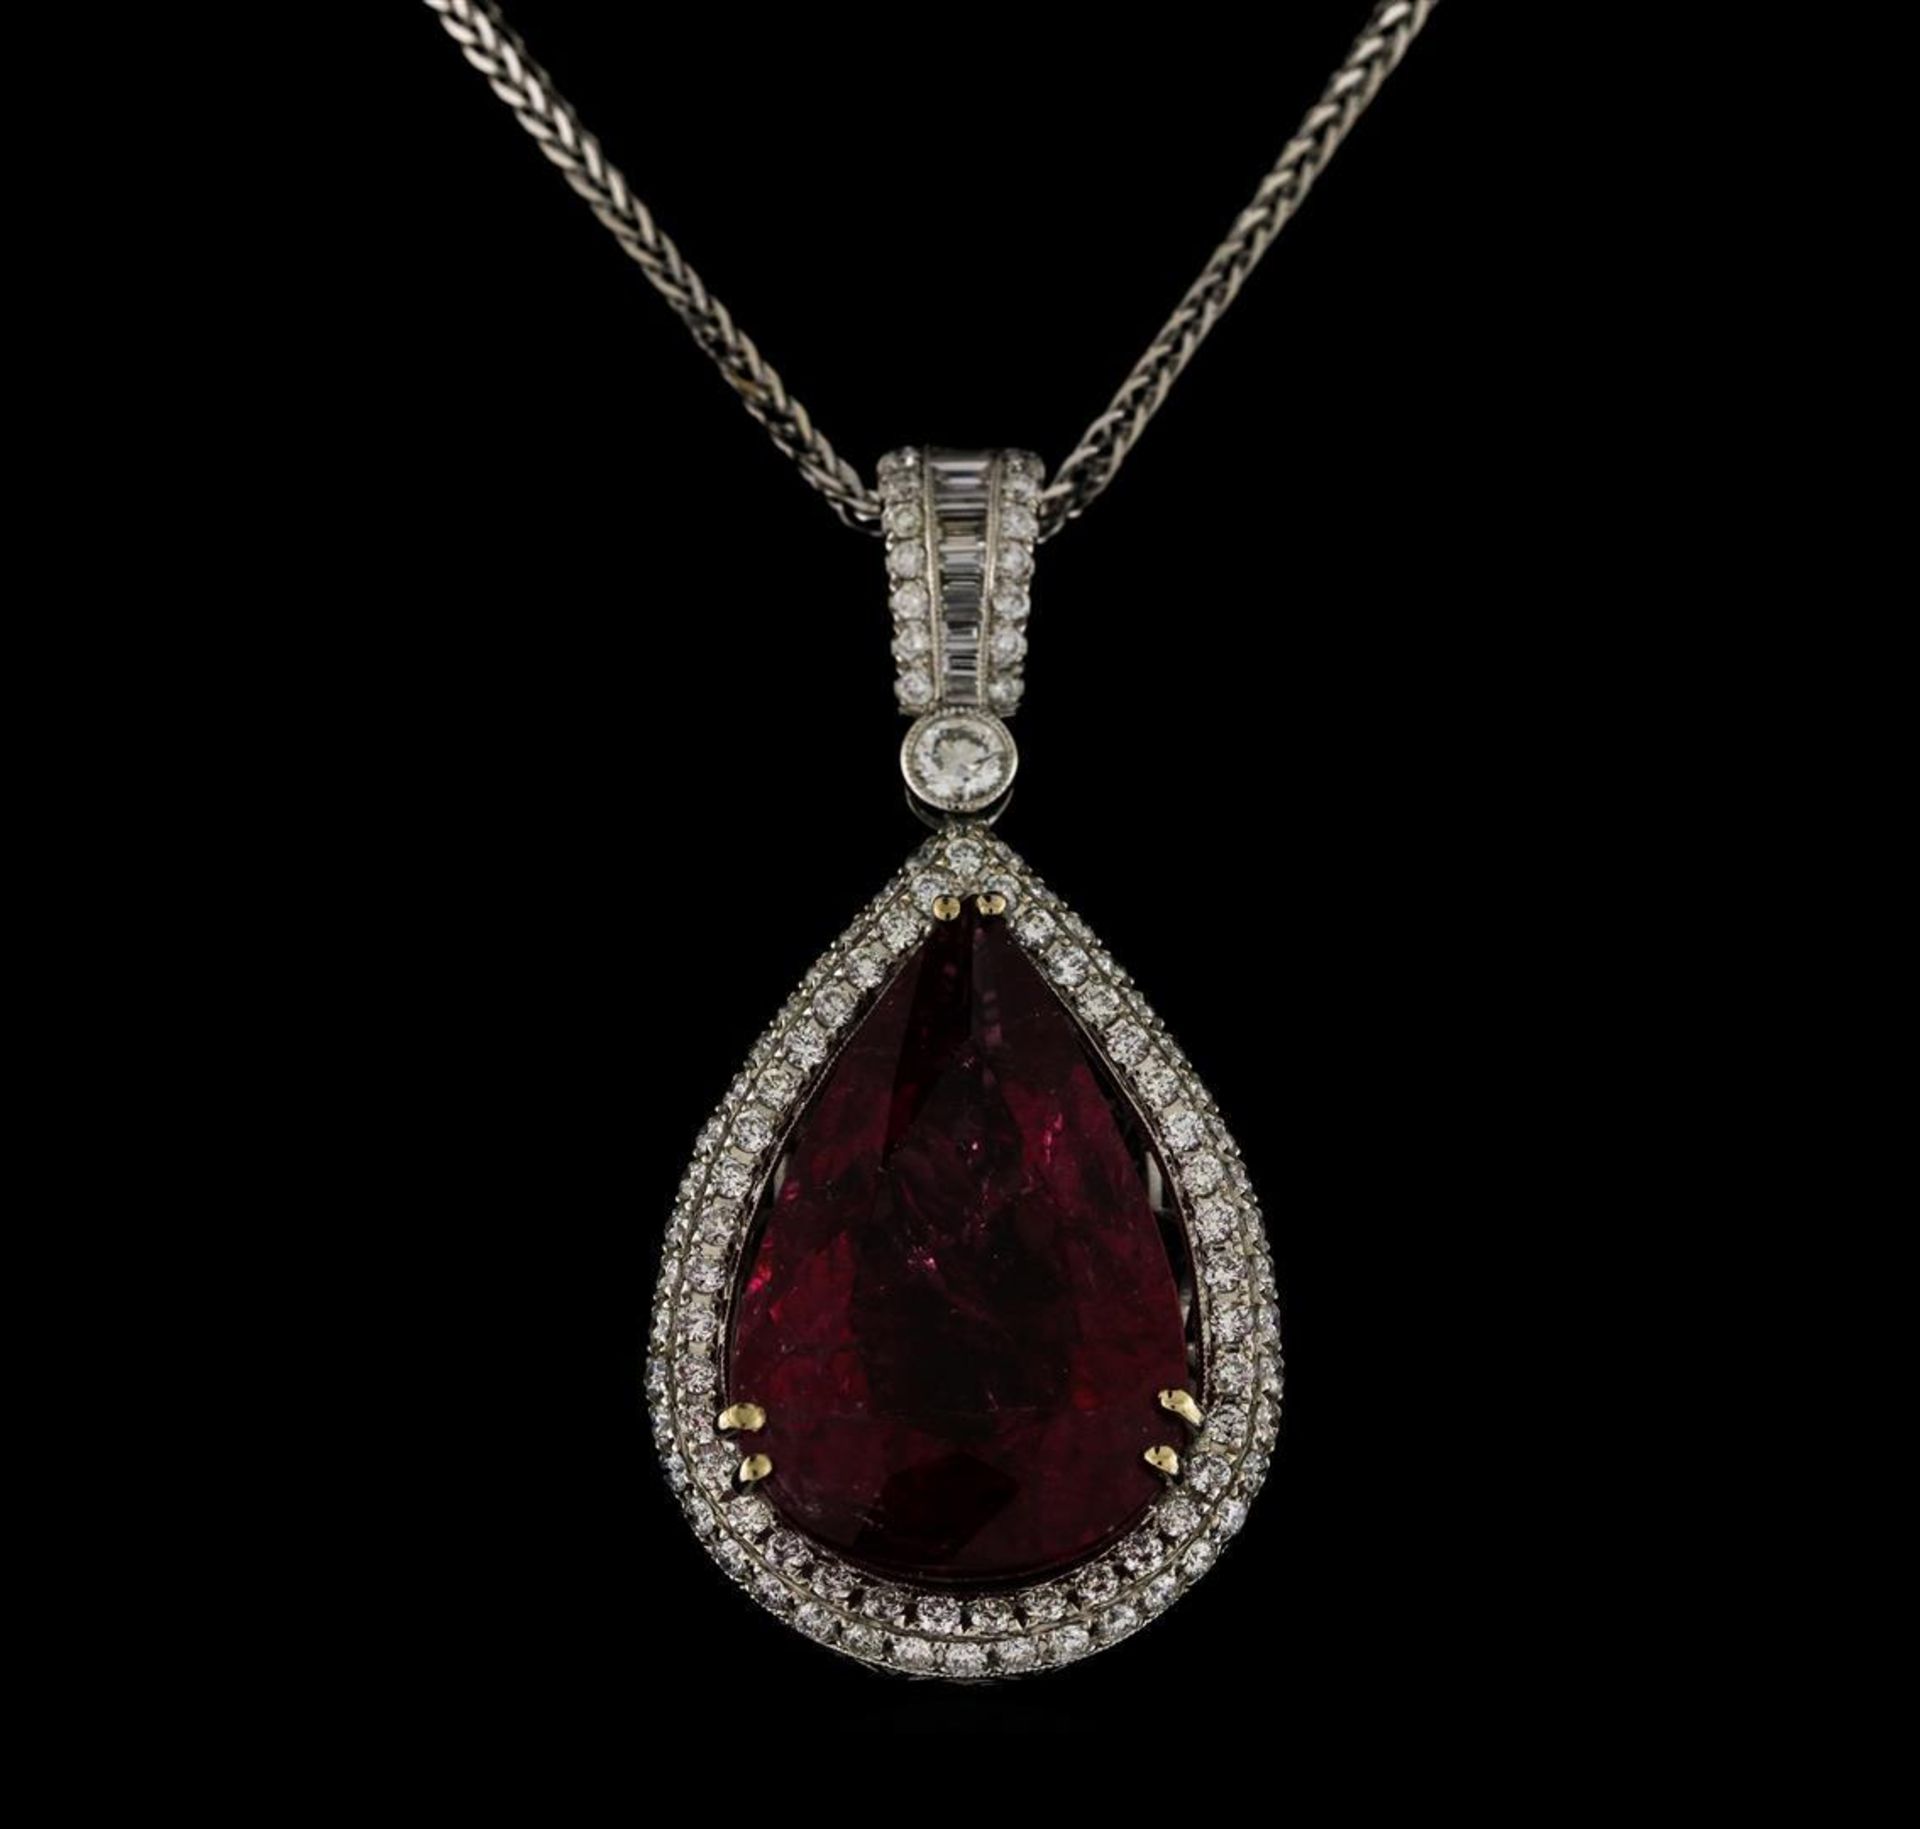 17.94 ctw Tourmaline and Diamond Pendant With Chain - 18KT White Gold - Image 2 of 3